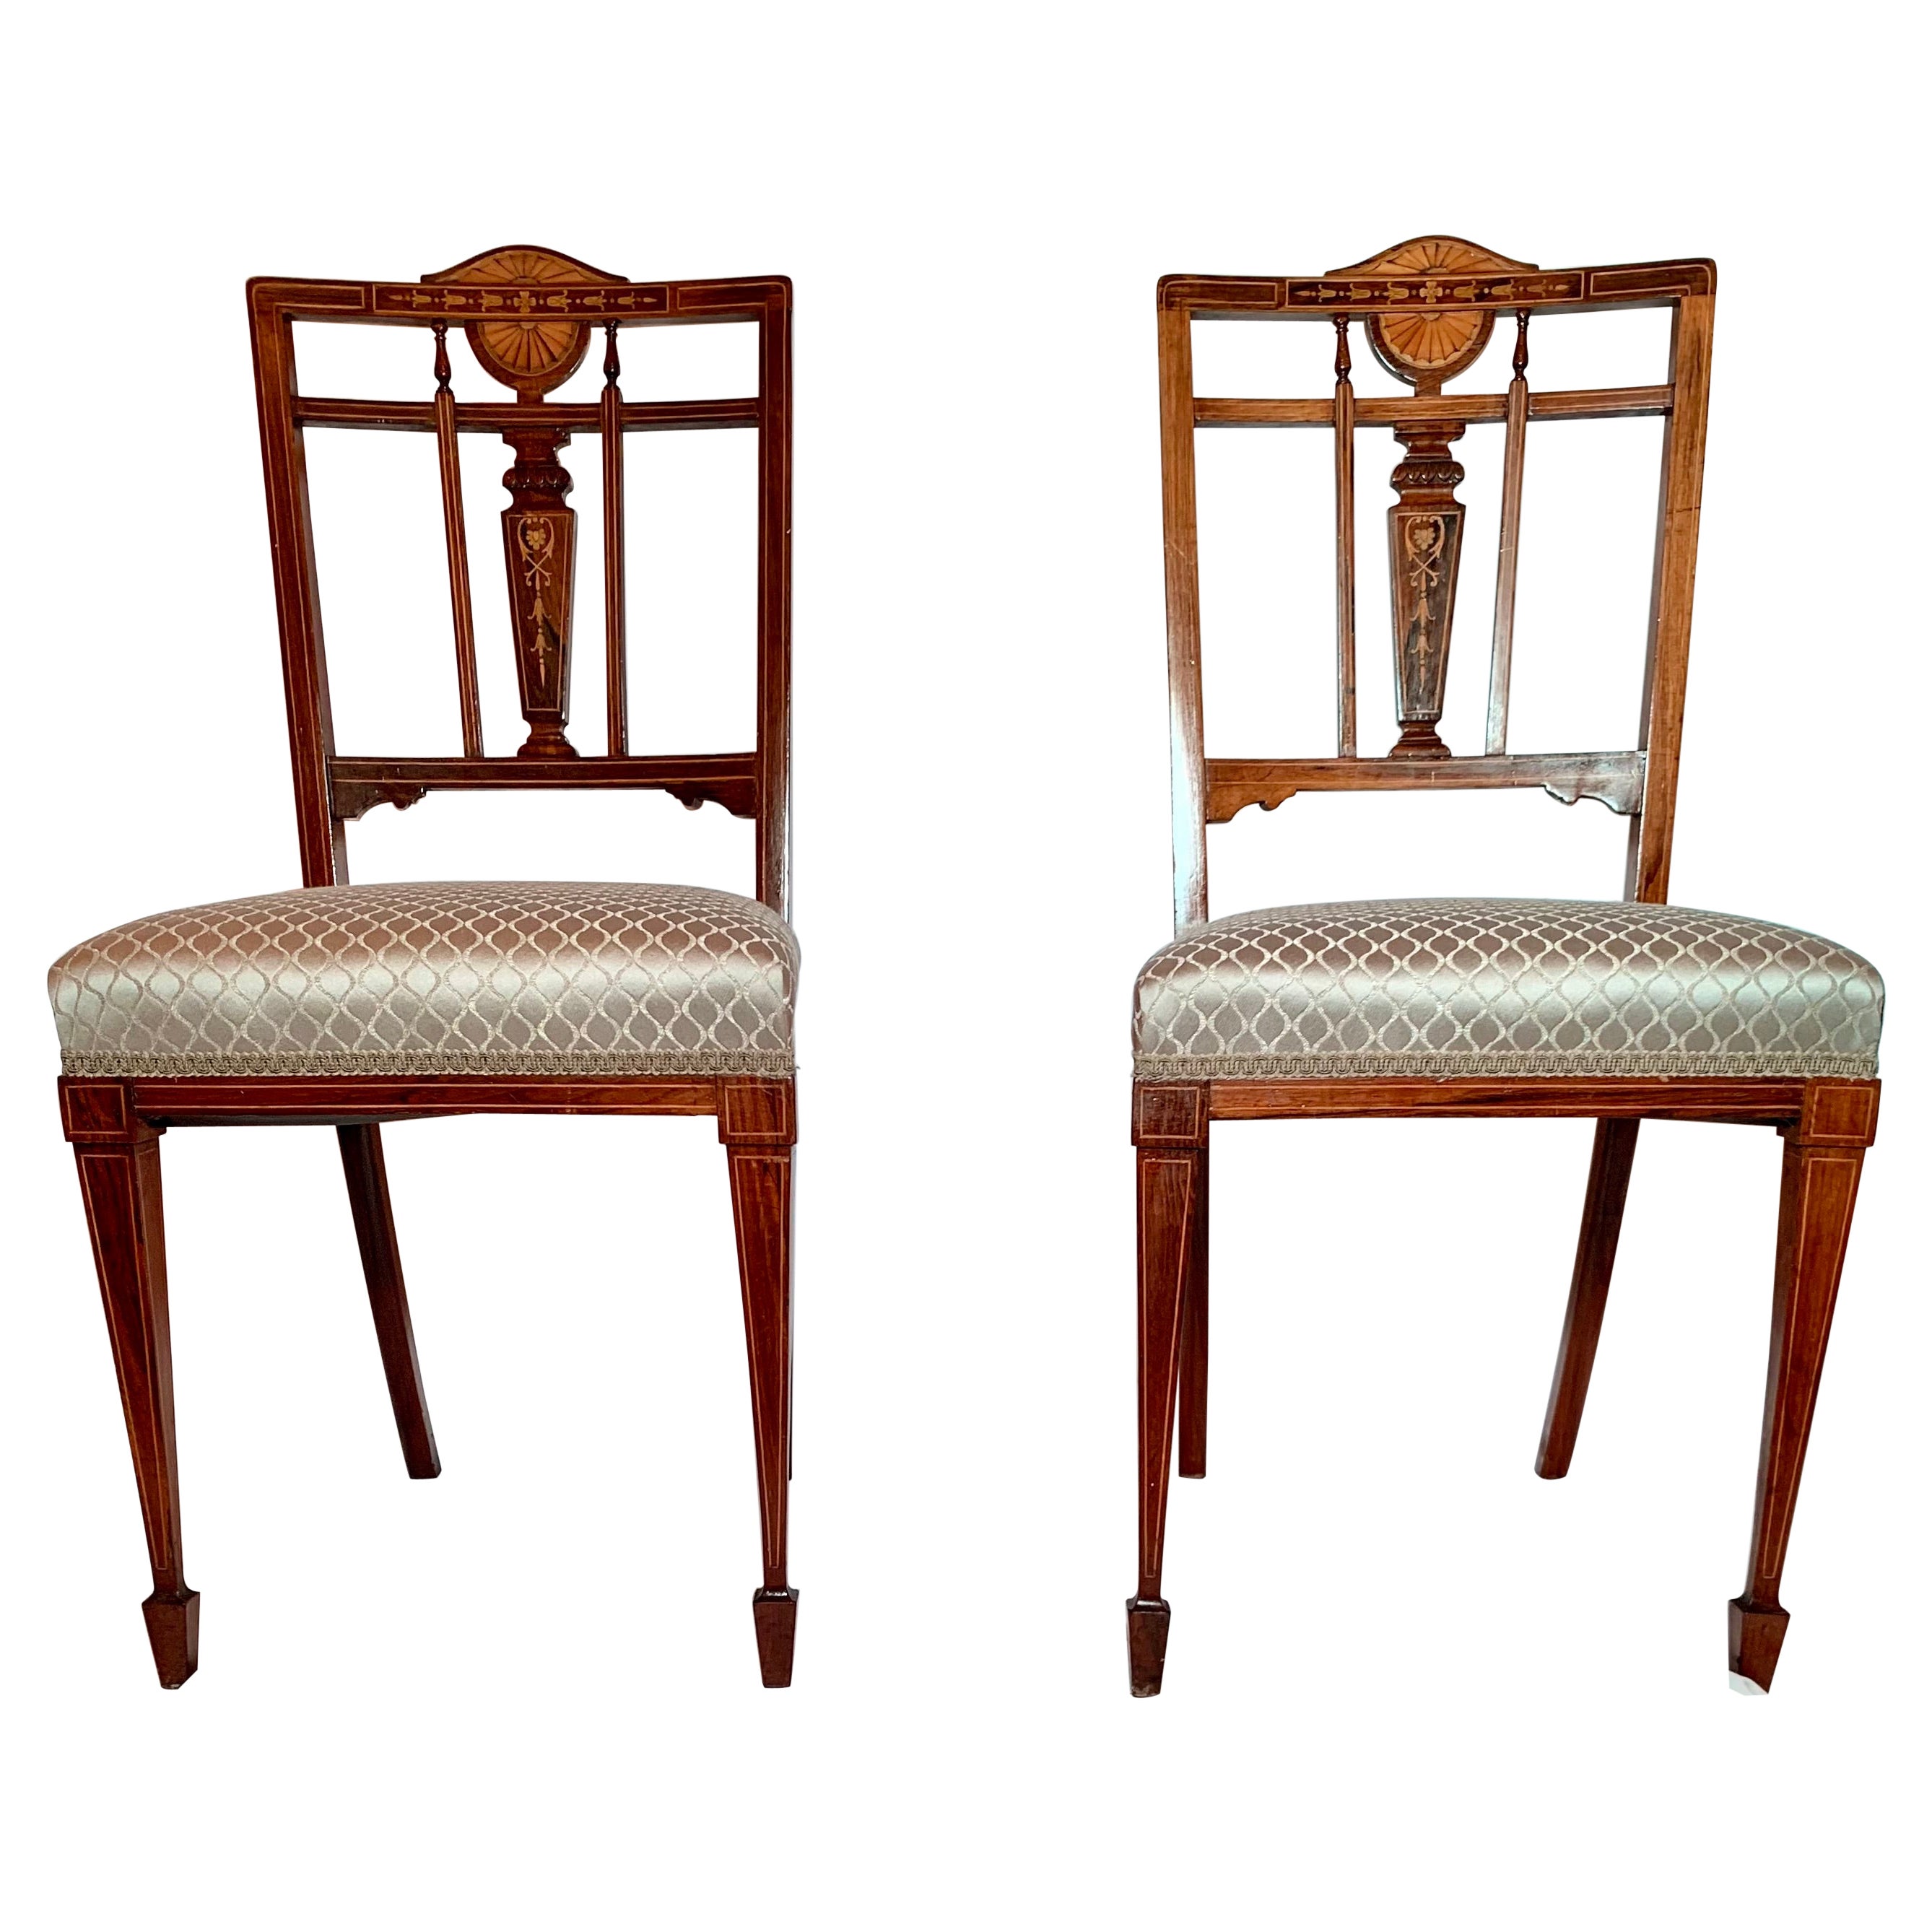 Set of 4 Antique English Sage Green Upholstered Rosewood Side Chairs, Circa 1880 For Sale